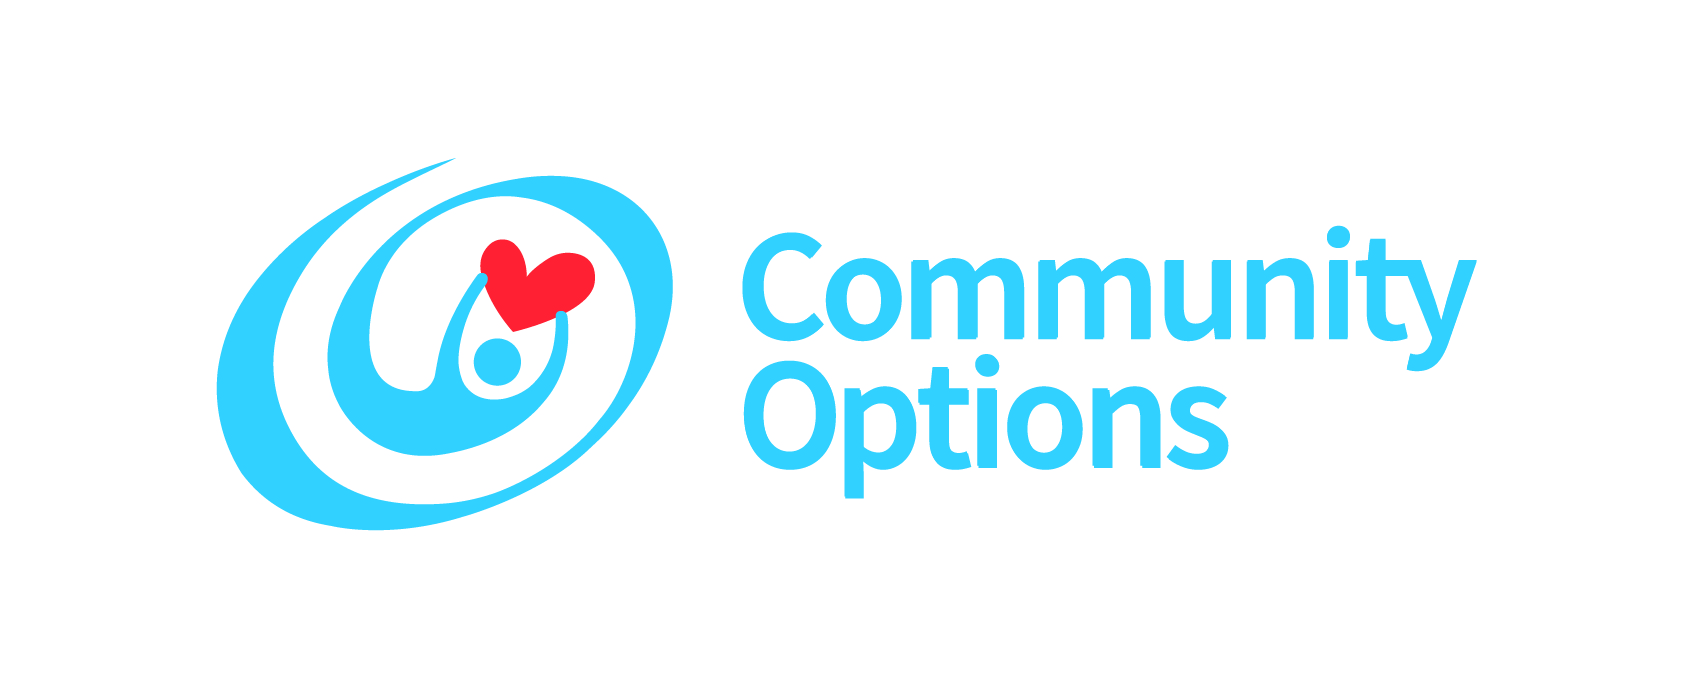 C O C F COMMUNITY OPTIONS FOR CHILDREN AND FAMILIES SOCIETY logo